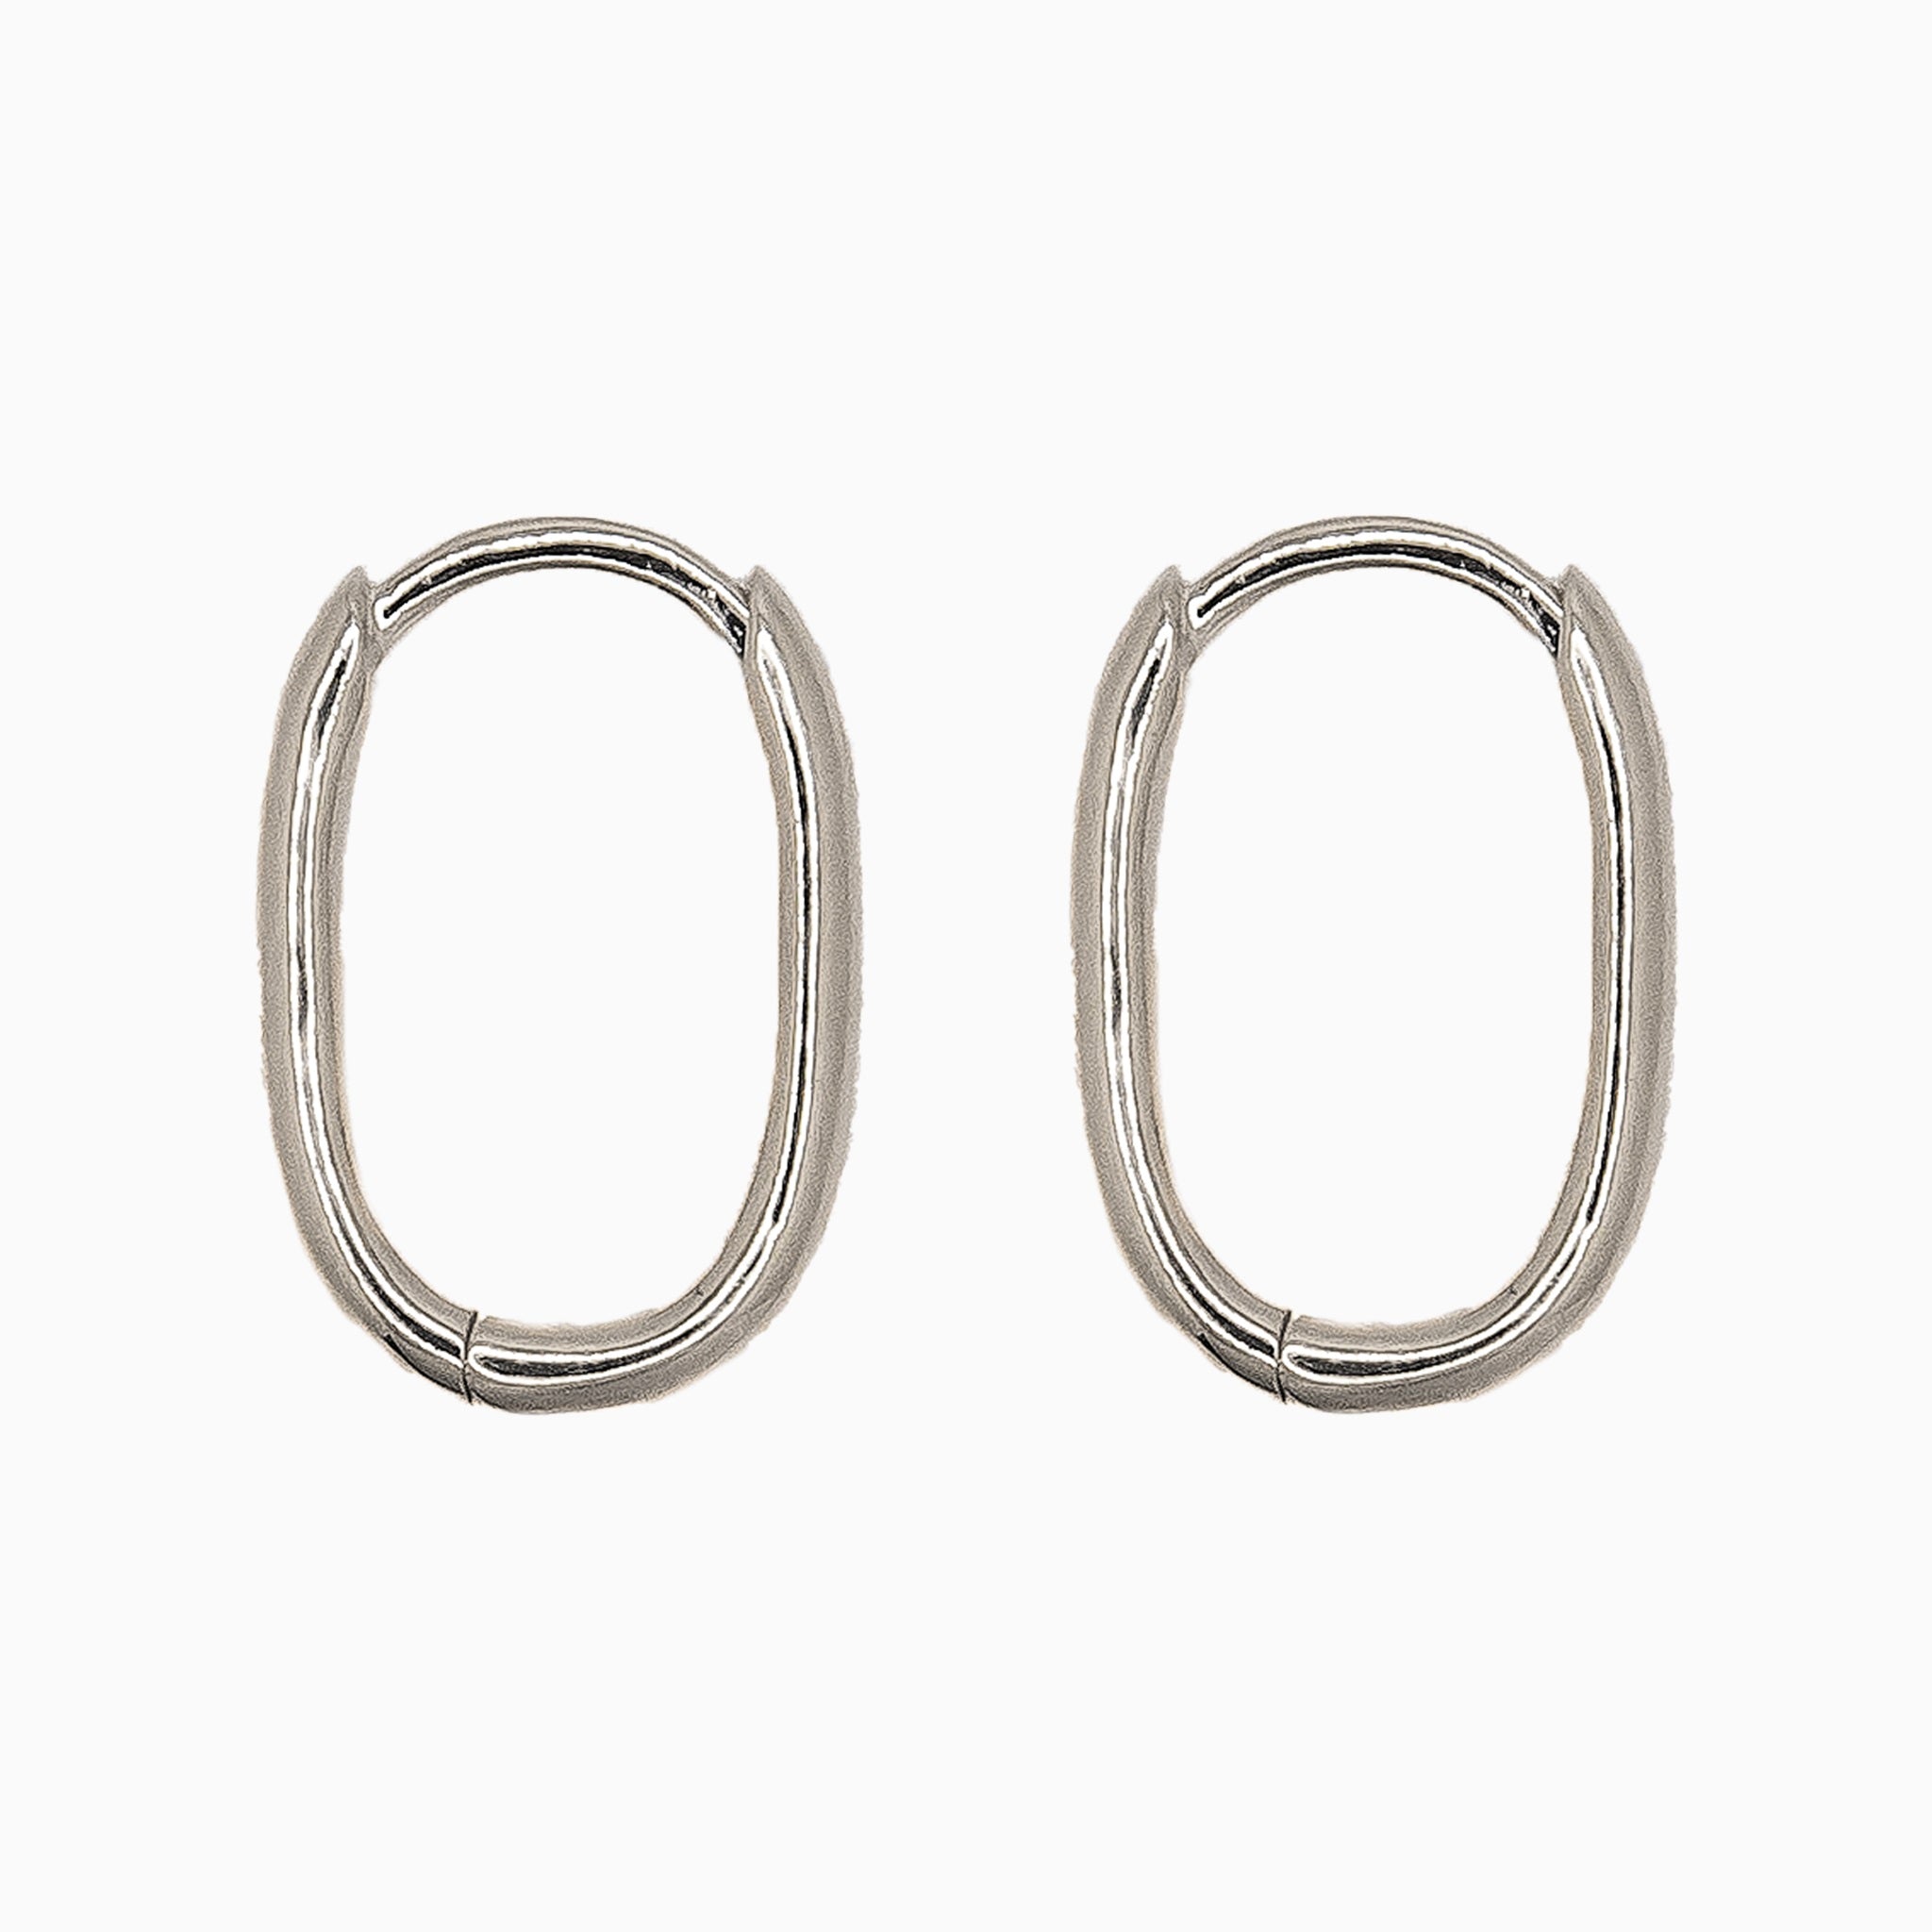 14k White Gold 15mm x 10mm Hinged Everyday Oval Hoop Earrings, Side View